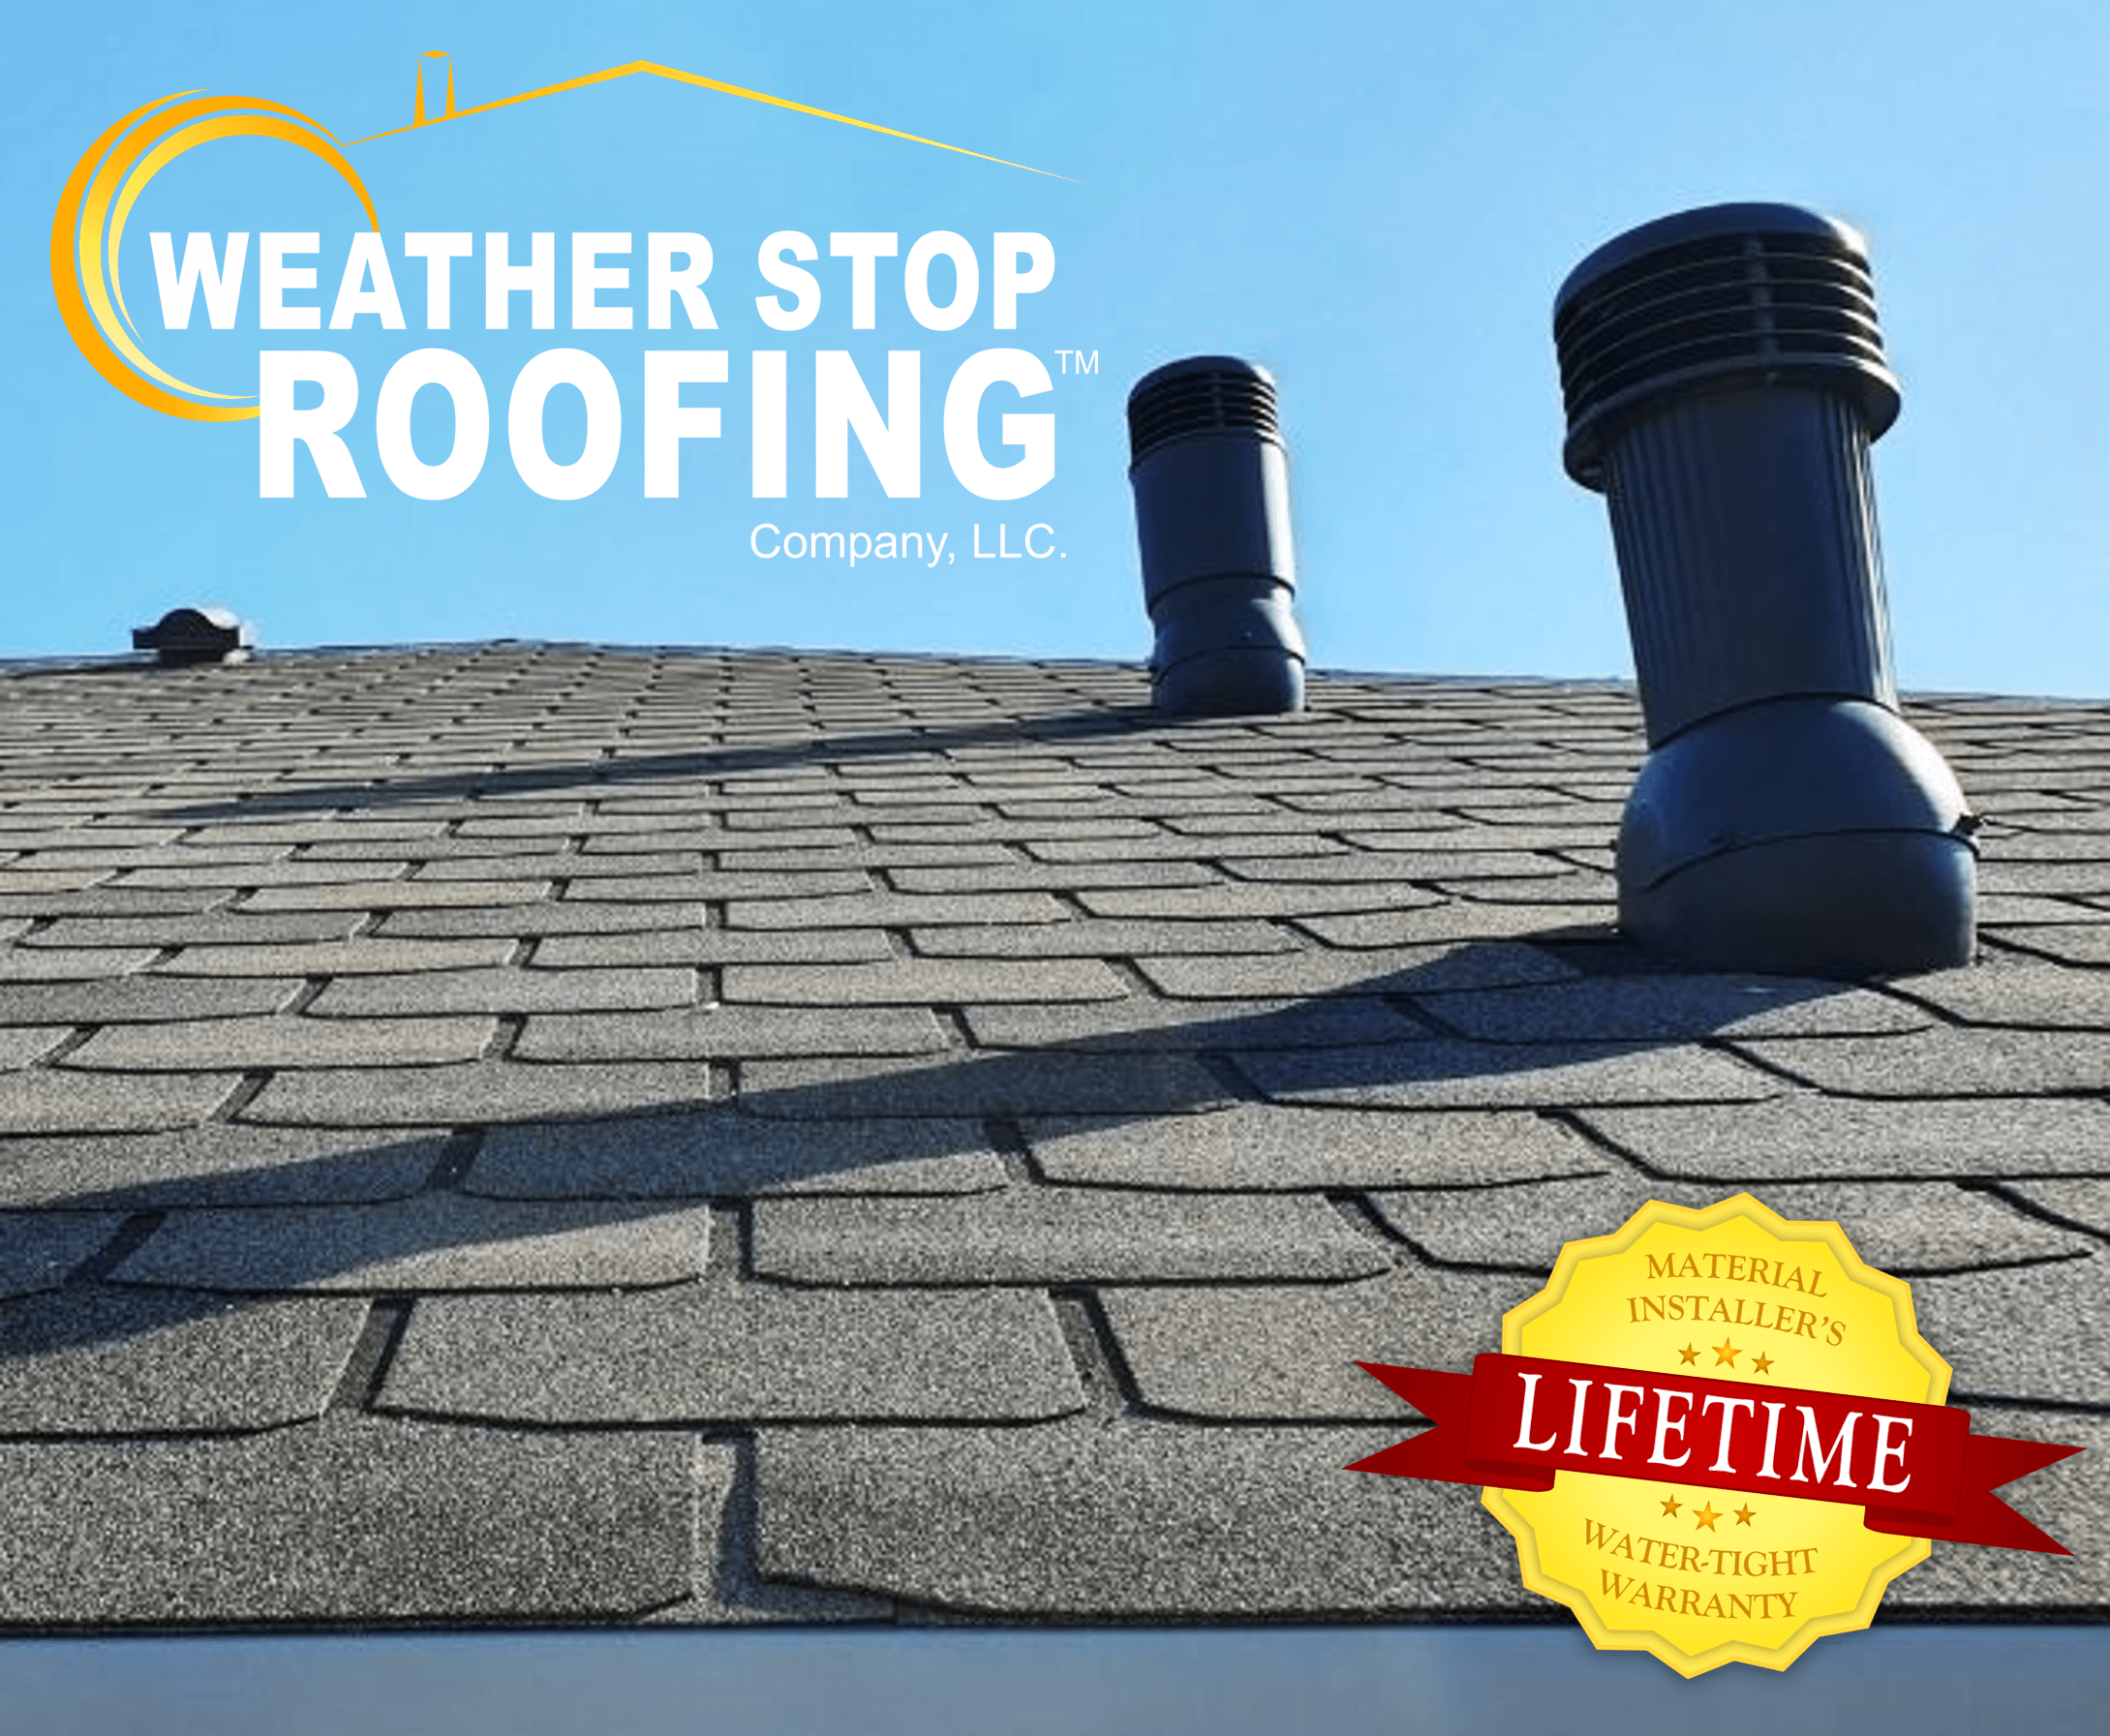 Perfect Roof Job - About Weather Stop Roofing Greater Cincinnati